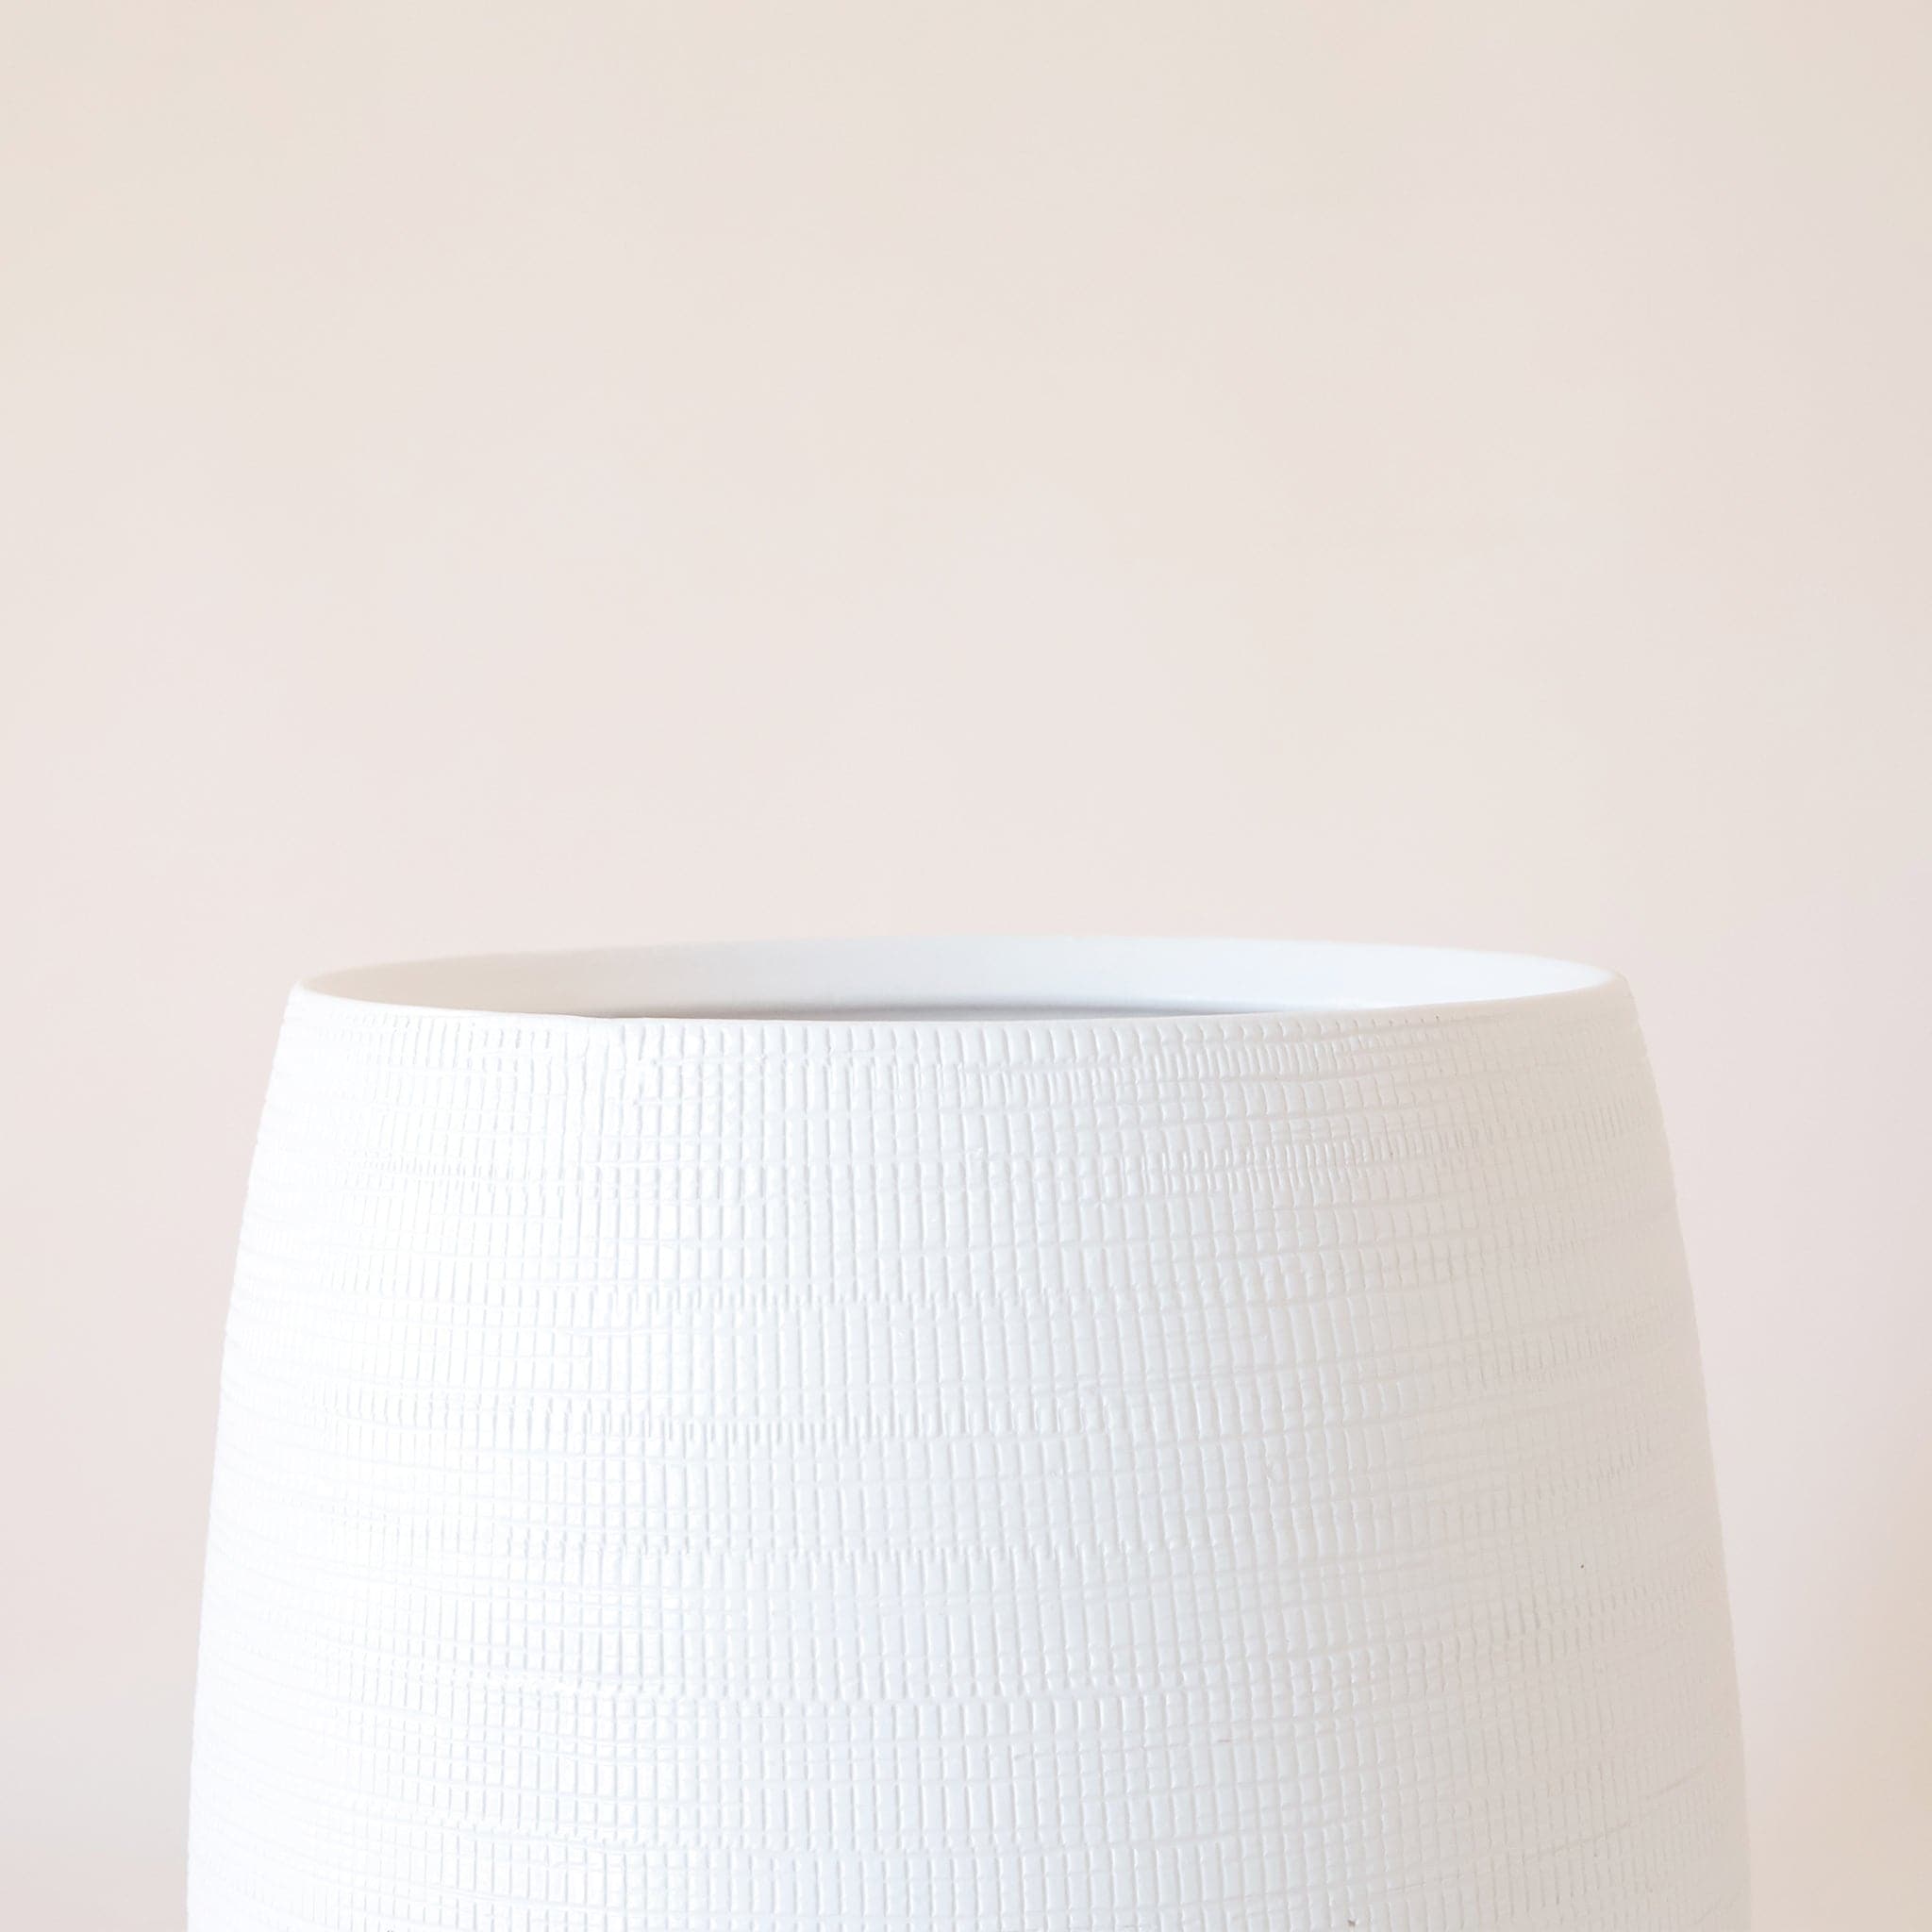 On a cream background is a white rounded ceramic pot with a tiny rectangular texture all over.